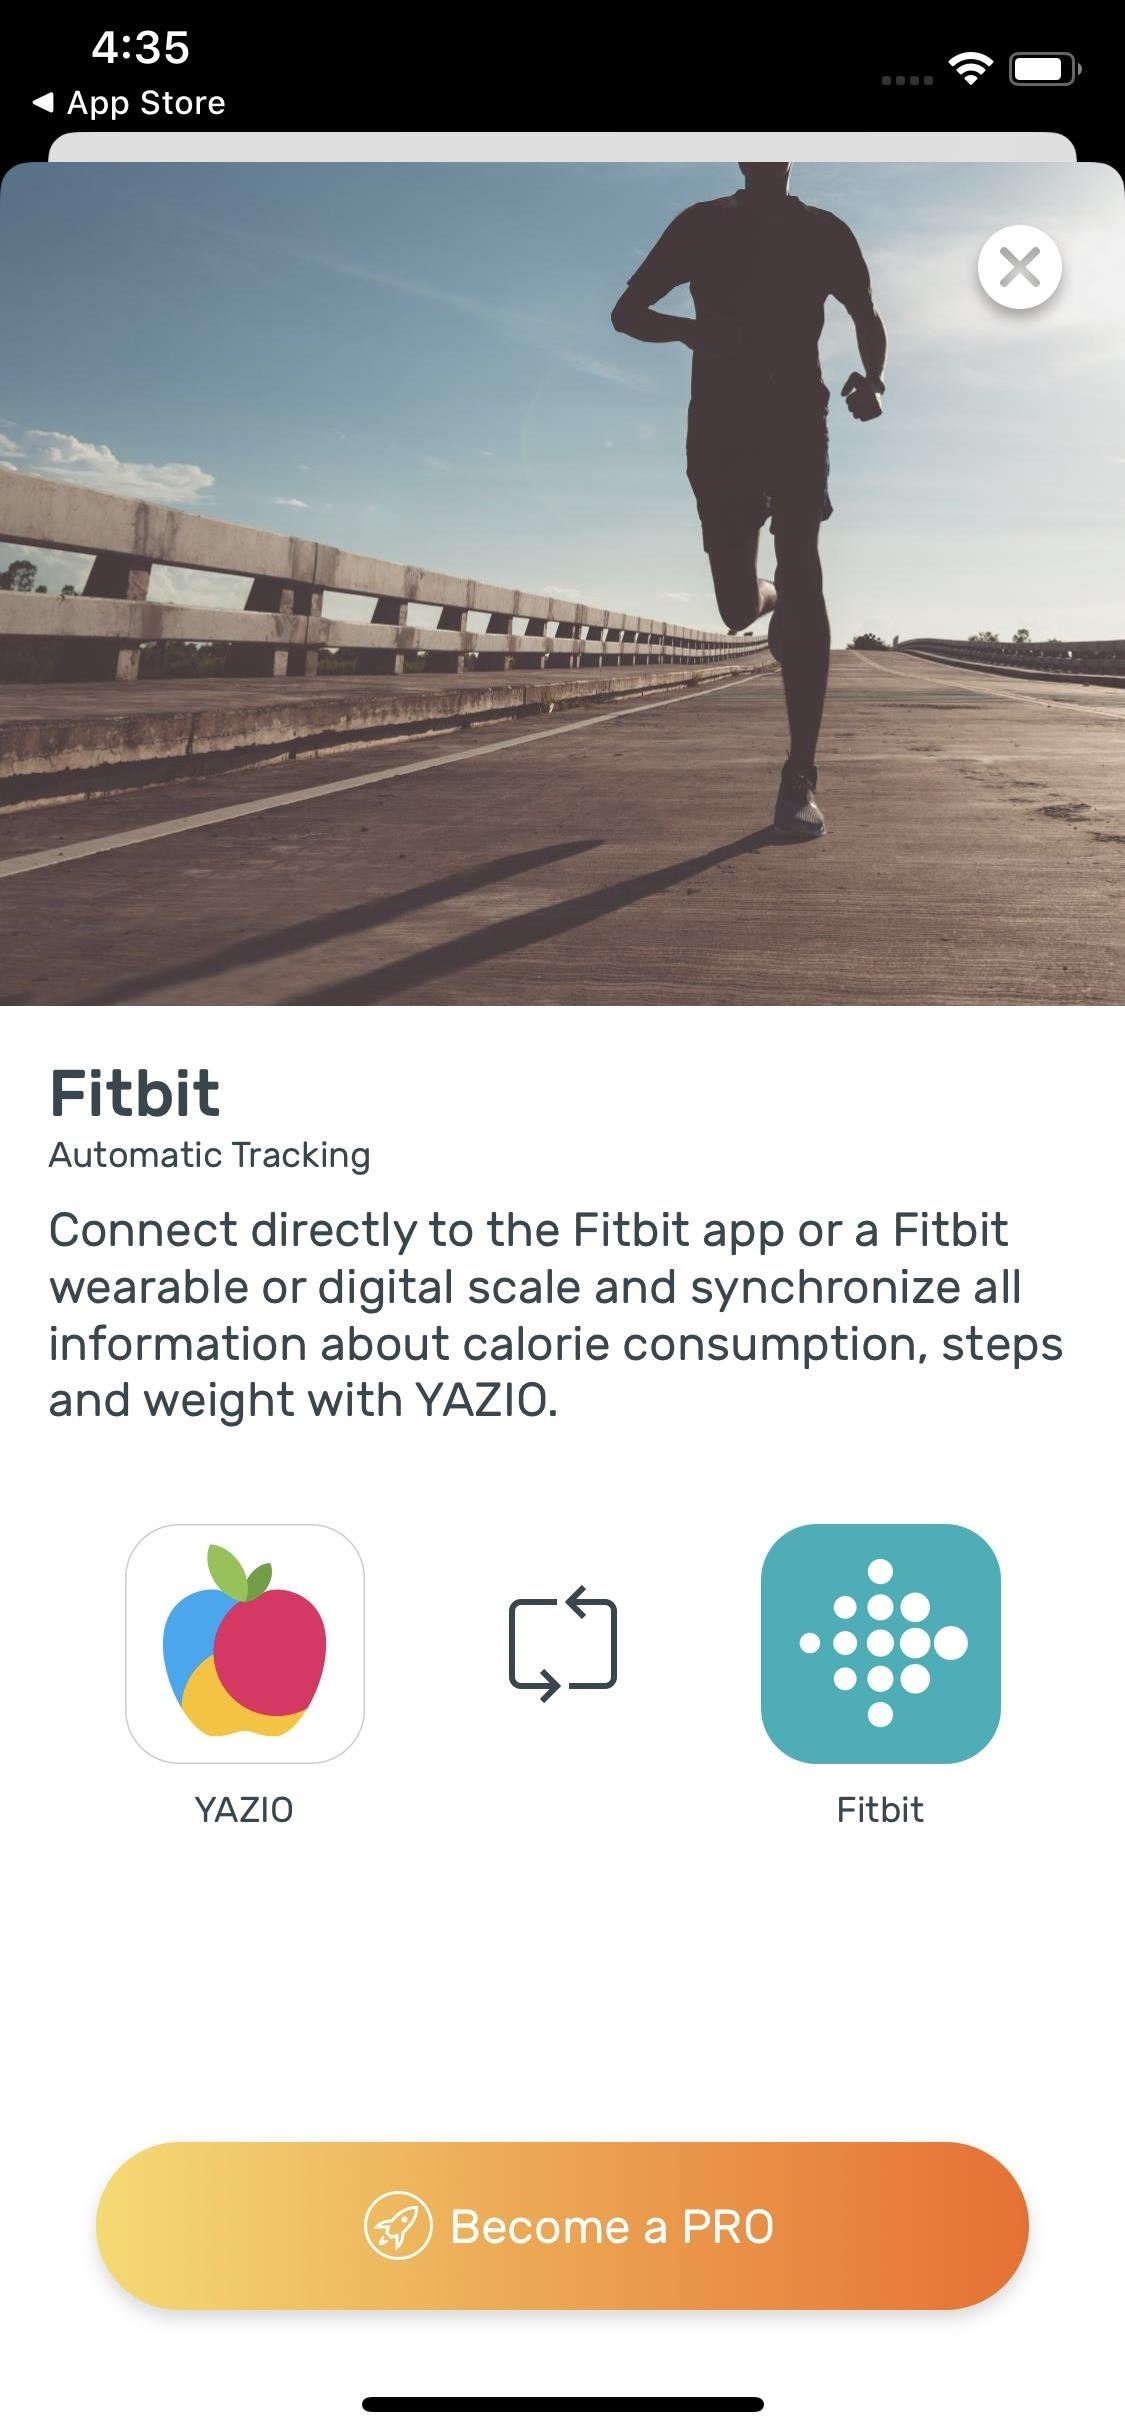 The 5 Best Meal Tracking Apps for Managing Your Diet & Counting Calories